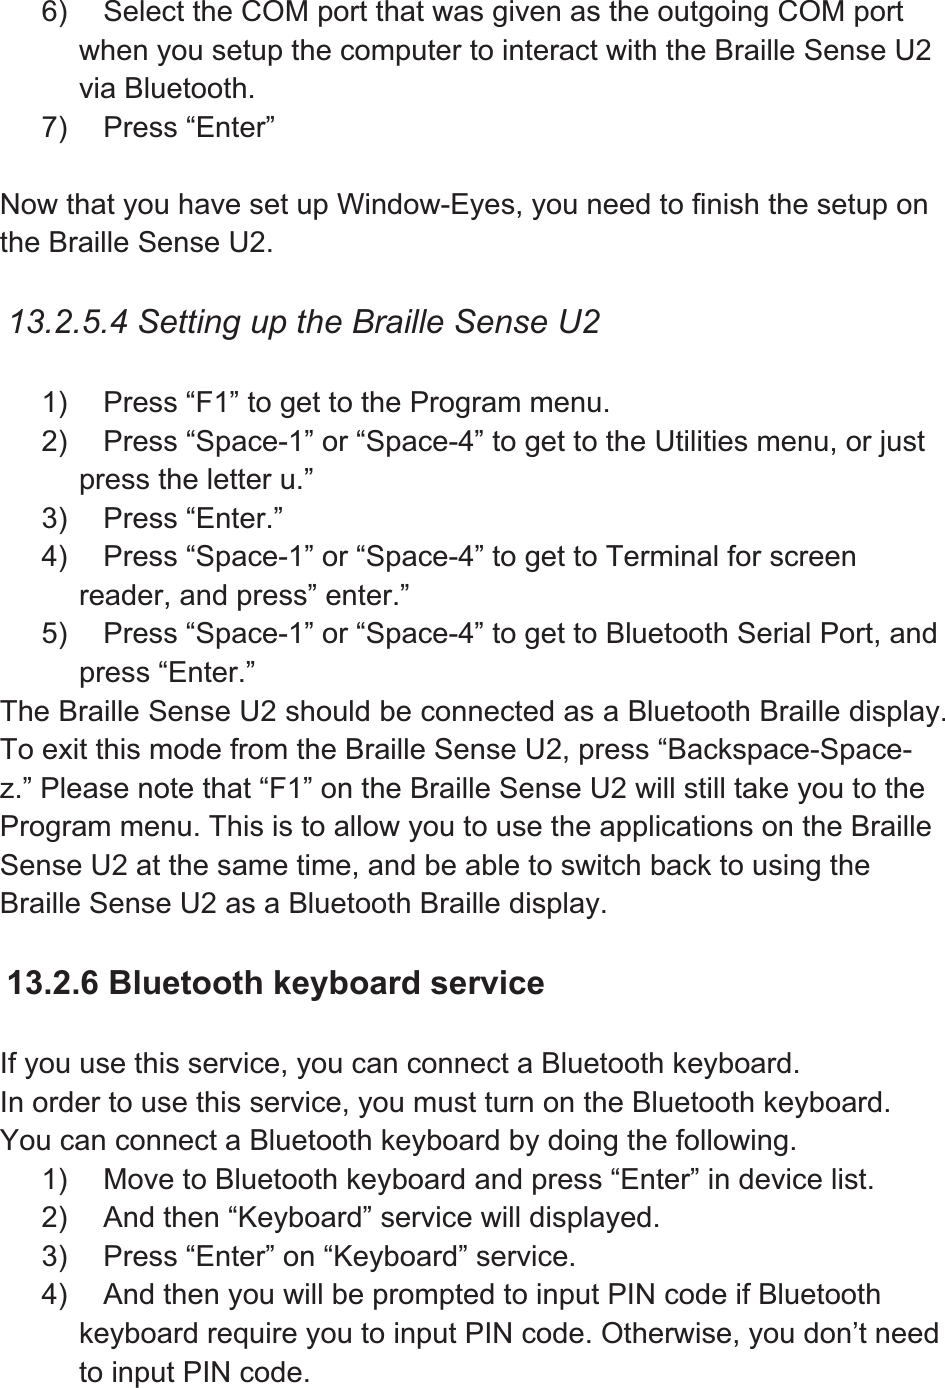 6)  Select the COM port that was given as the outgoing COM port when you setup the computer to interact with the Braille Sense U2 via Bluetooth. 7) Press “Enter” Now that you have set up Window-Eyes, you need to finish the setup on the Braille Sense U2. 13.2.5.4 Setting up the Braille Sense U2 1)  Press “F1” to get to the Program menu. 2)  Press “Space-1” or “Space-4” to get to the Utilities menu, or just press the letter u.” 3) Press “Enter.” 4)  Press “Space-1” or “Space-4” to get to Terminal for screen reader, and press” enter.” 5)  Press “Space-1” or “Space-4” to get to Bluetooth Serial Port, and press “Enter.” The Braille Sense U2 should be connected as a Bluetooth Braille display. To exit this mode from the Braille Sense U2, press “Backspace-Space-z.” Please note that “F1” on the Braille Sense U2 will still take you to the Program menu. This is to allow you to use the applications on the Braille Sense U2 at the same time, and be able to switch back to using the Braille Sense U2 as a Bluetooth Braille display. 13.2.6 Bluetooth keyboard service If you use this service, you can connect a Bluetooth keyboard.   In order to use this service, you must turn on the Bluetooth keyboard. You can connect a Bluetooth keyboard by doing the following. 1)  Move to Bluetooth keyboard and press “Enter” in device list. 2)  And then “Keyboard” service will displayed. 3)  Press “Enter” on “Keyboard” service. 4)  And then you will be prompted to input PIN code if Bluetooth keyboard require you to input PIN code. Otherwise, you don’t need to input PIN code. 